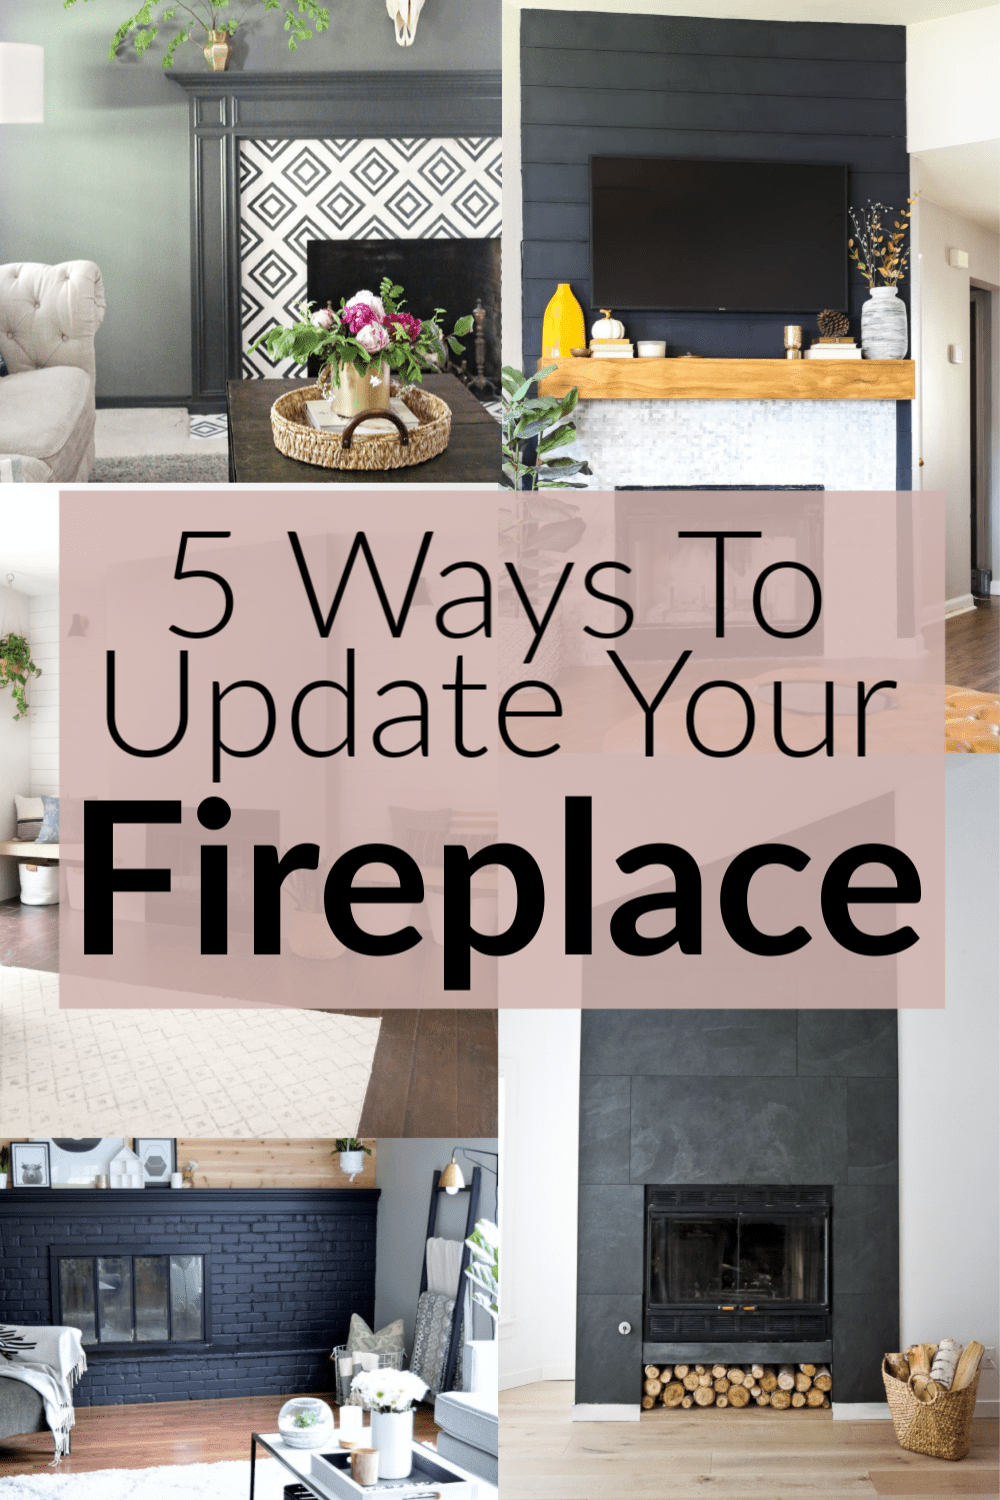 5 Things You Should Never Burn in Your Fireplace